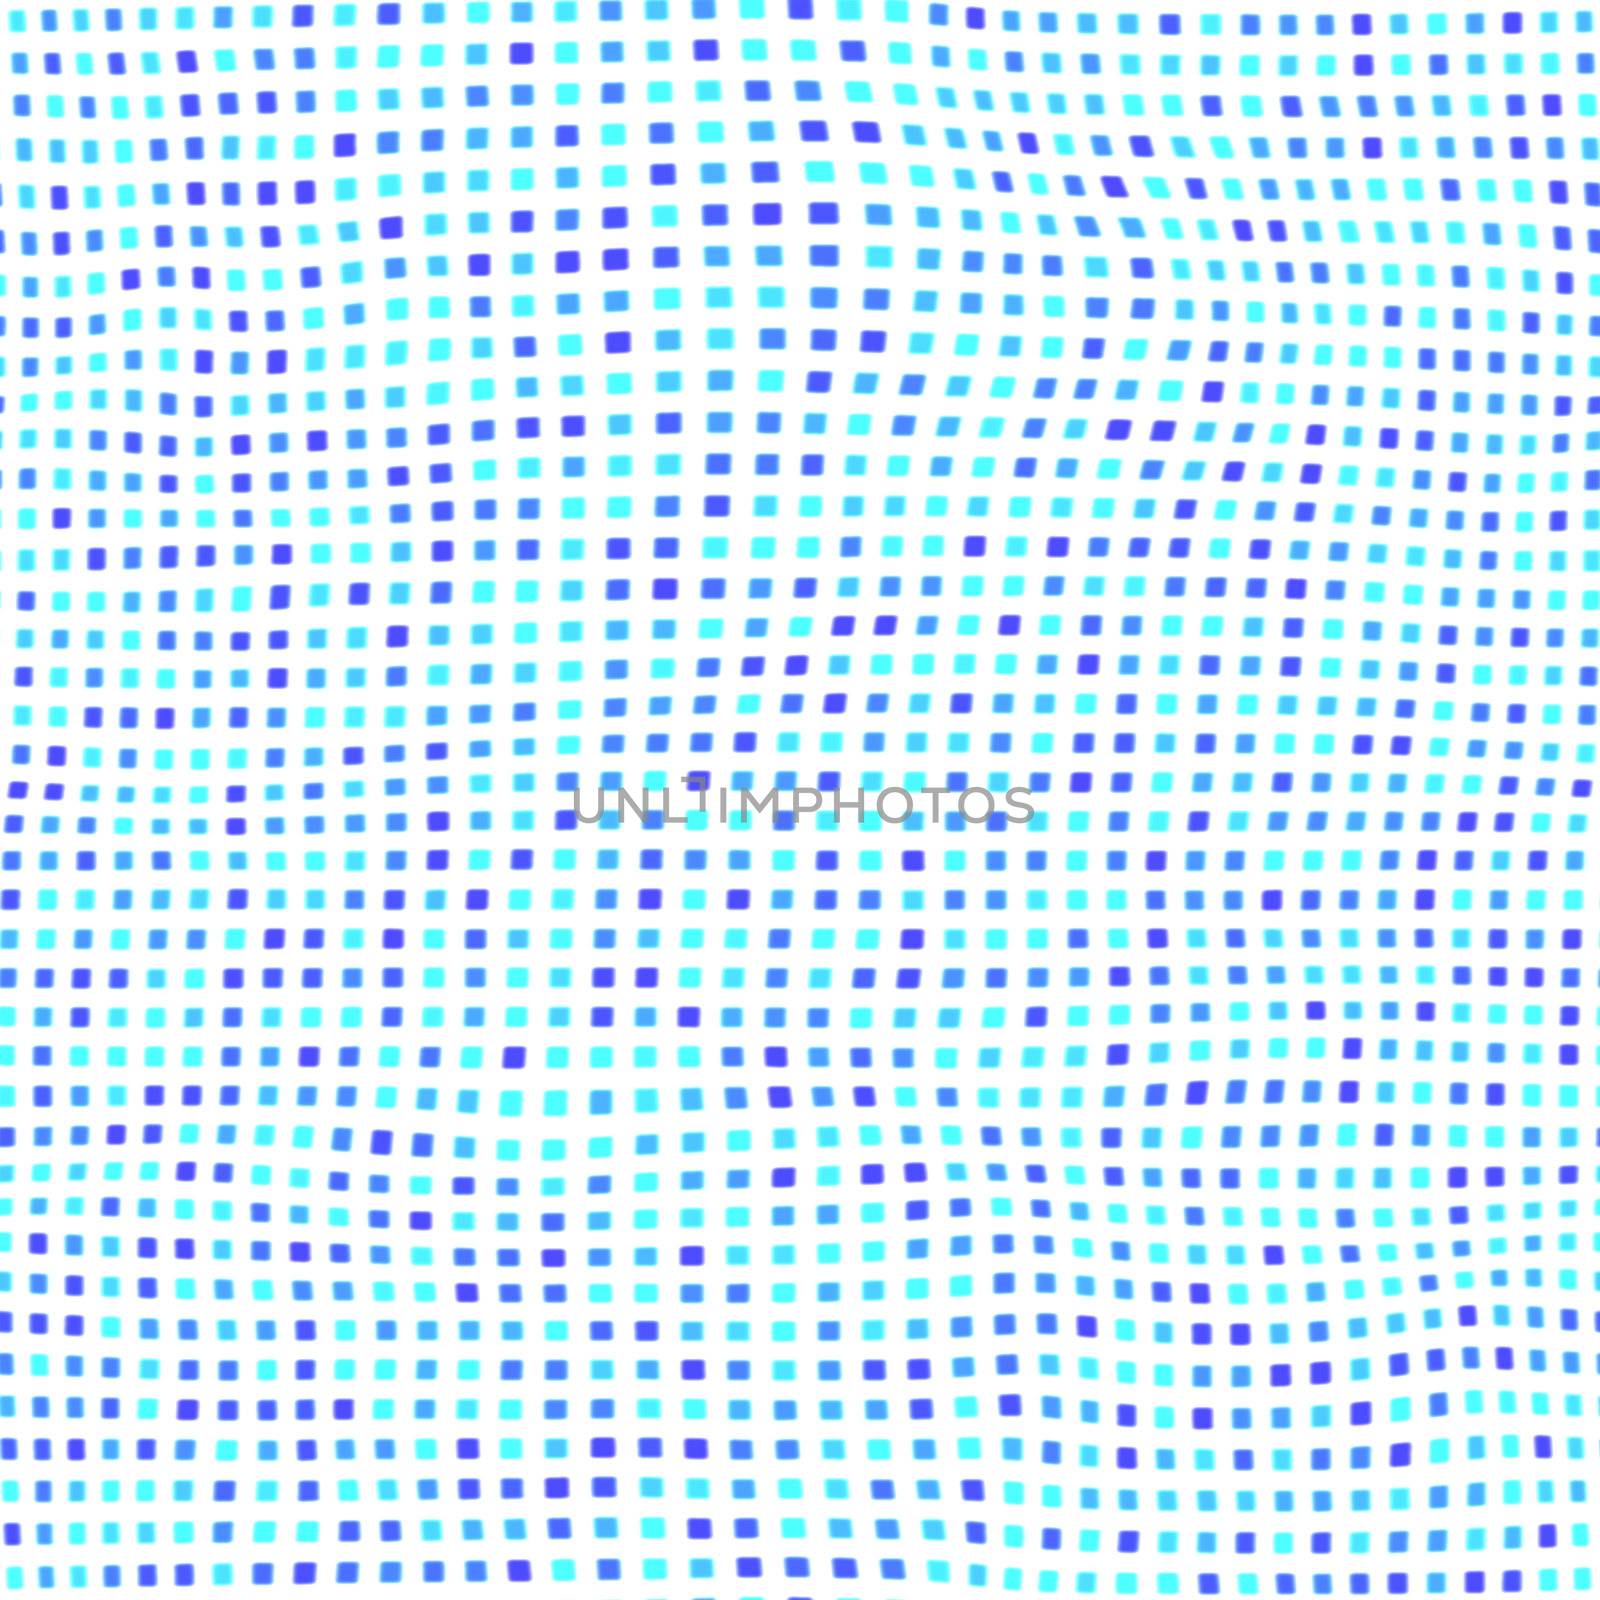 wavy cubic background with tiny dots, will tile seamlessly as a pattern